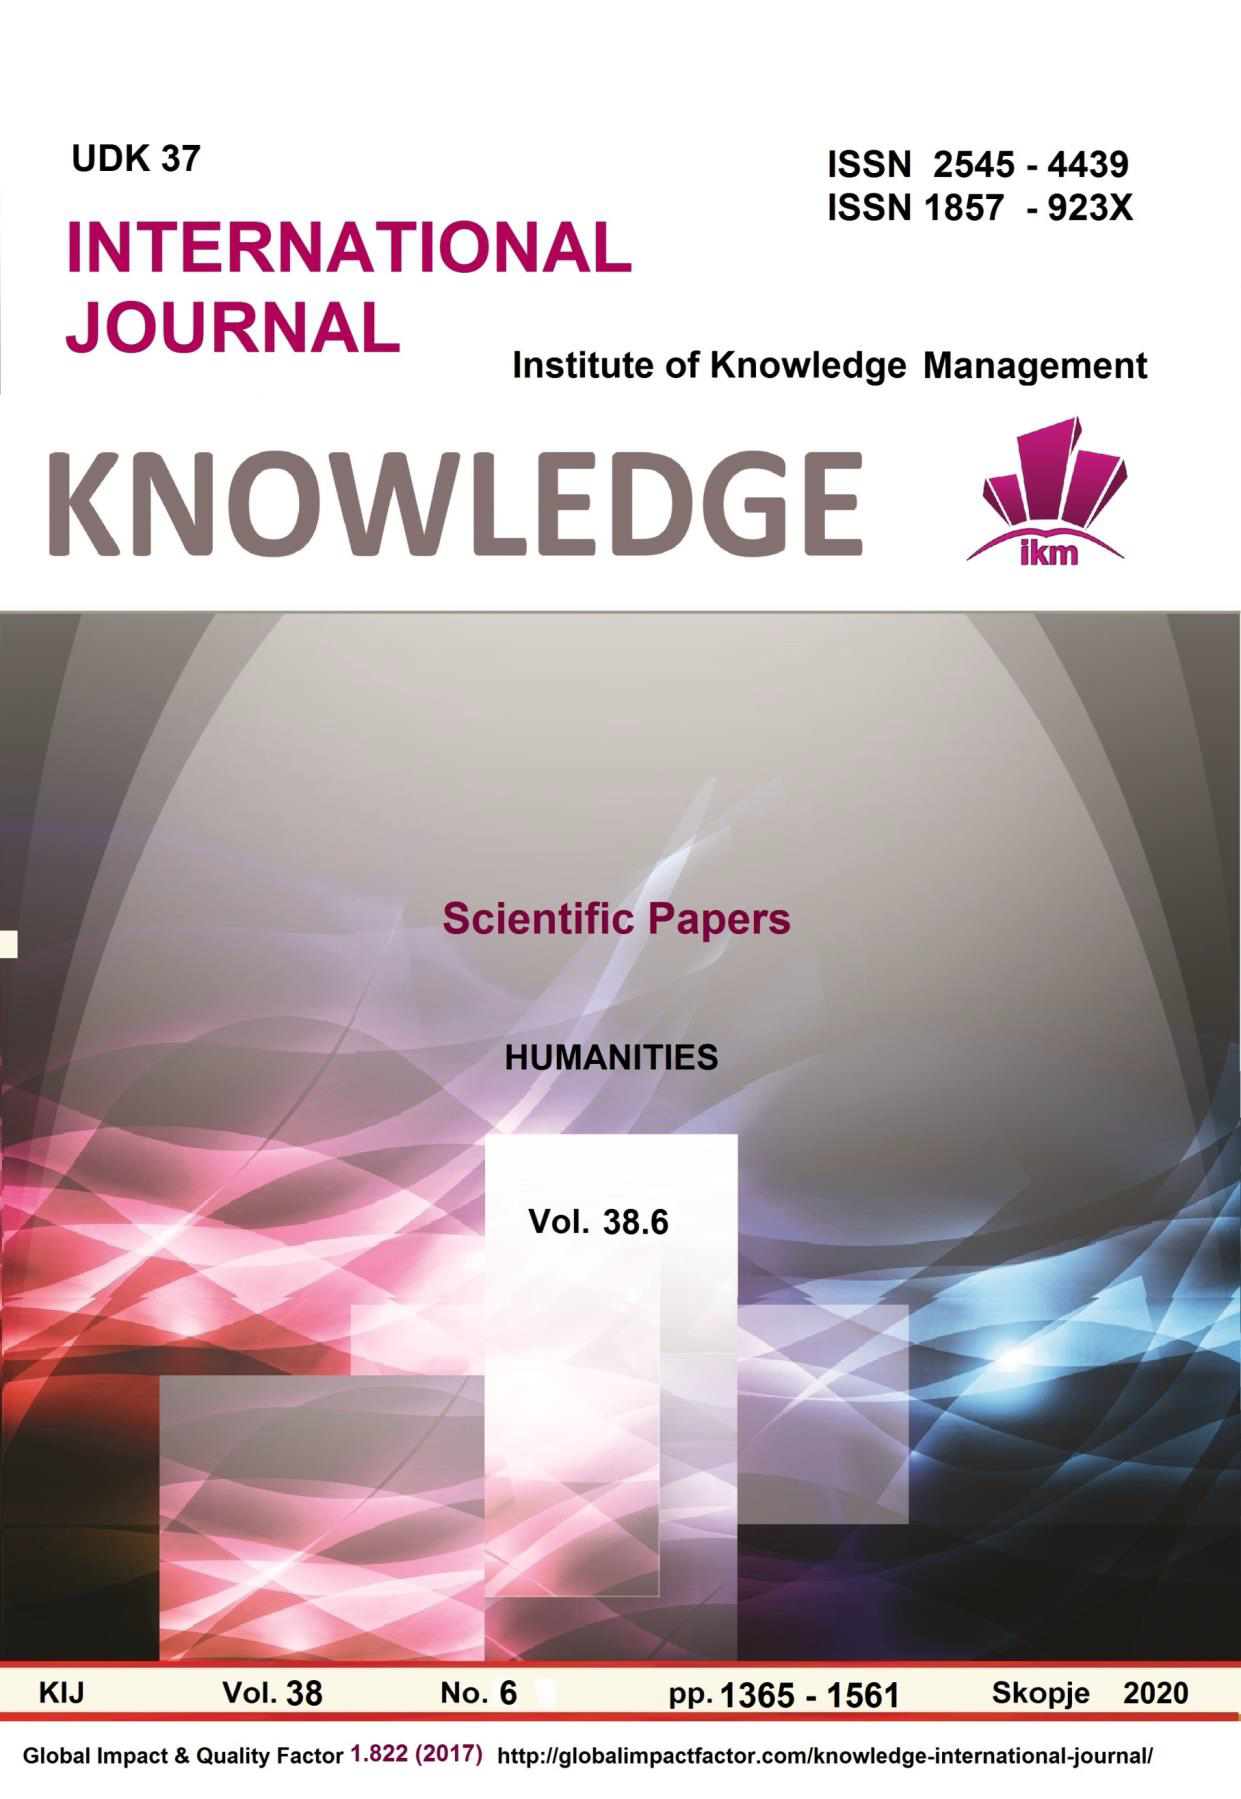 					View Vol. 38 No. 6 (2020): Knowledge without borders
				